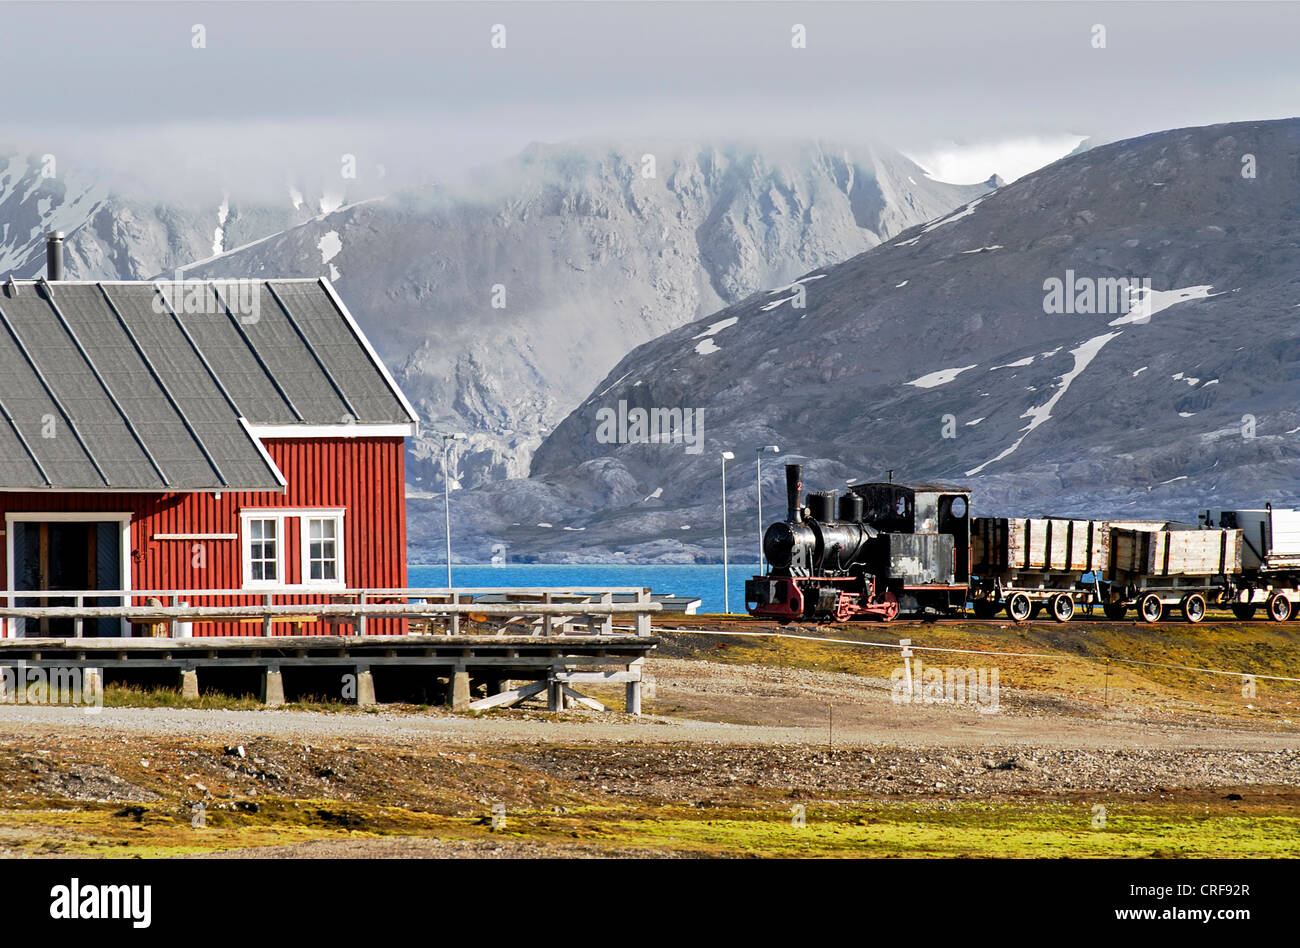 colourful house and a former coal train on display in the remote village of Ny Alesund, Norway, Svalbard Stock Photo